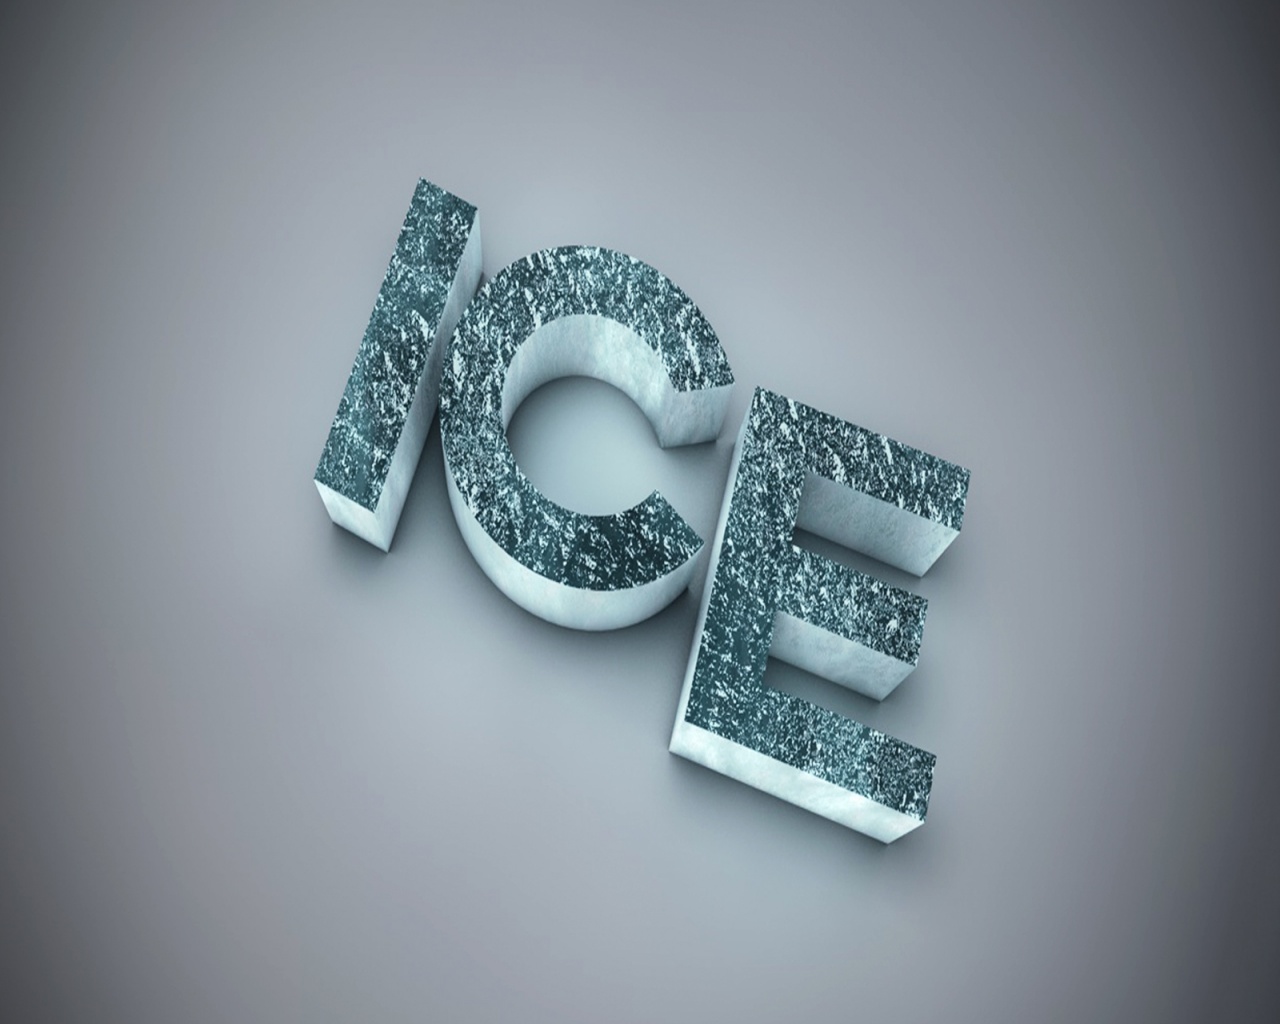 3D Text Effect, Thick and Glowing Letters, Gray to Black Background, Shall be Impressive--1280X1024 free wallpaper download